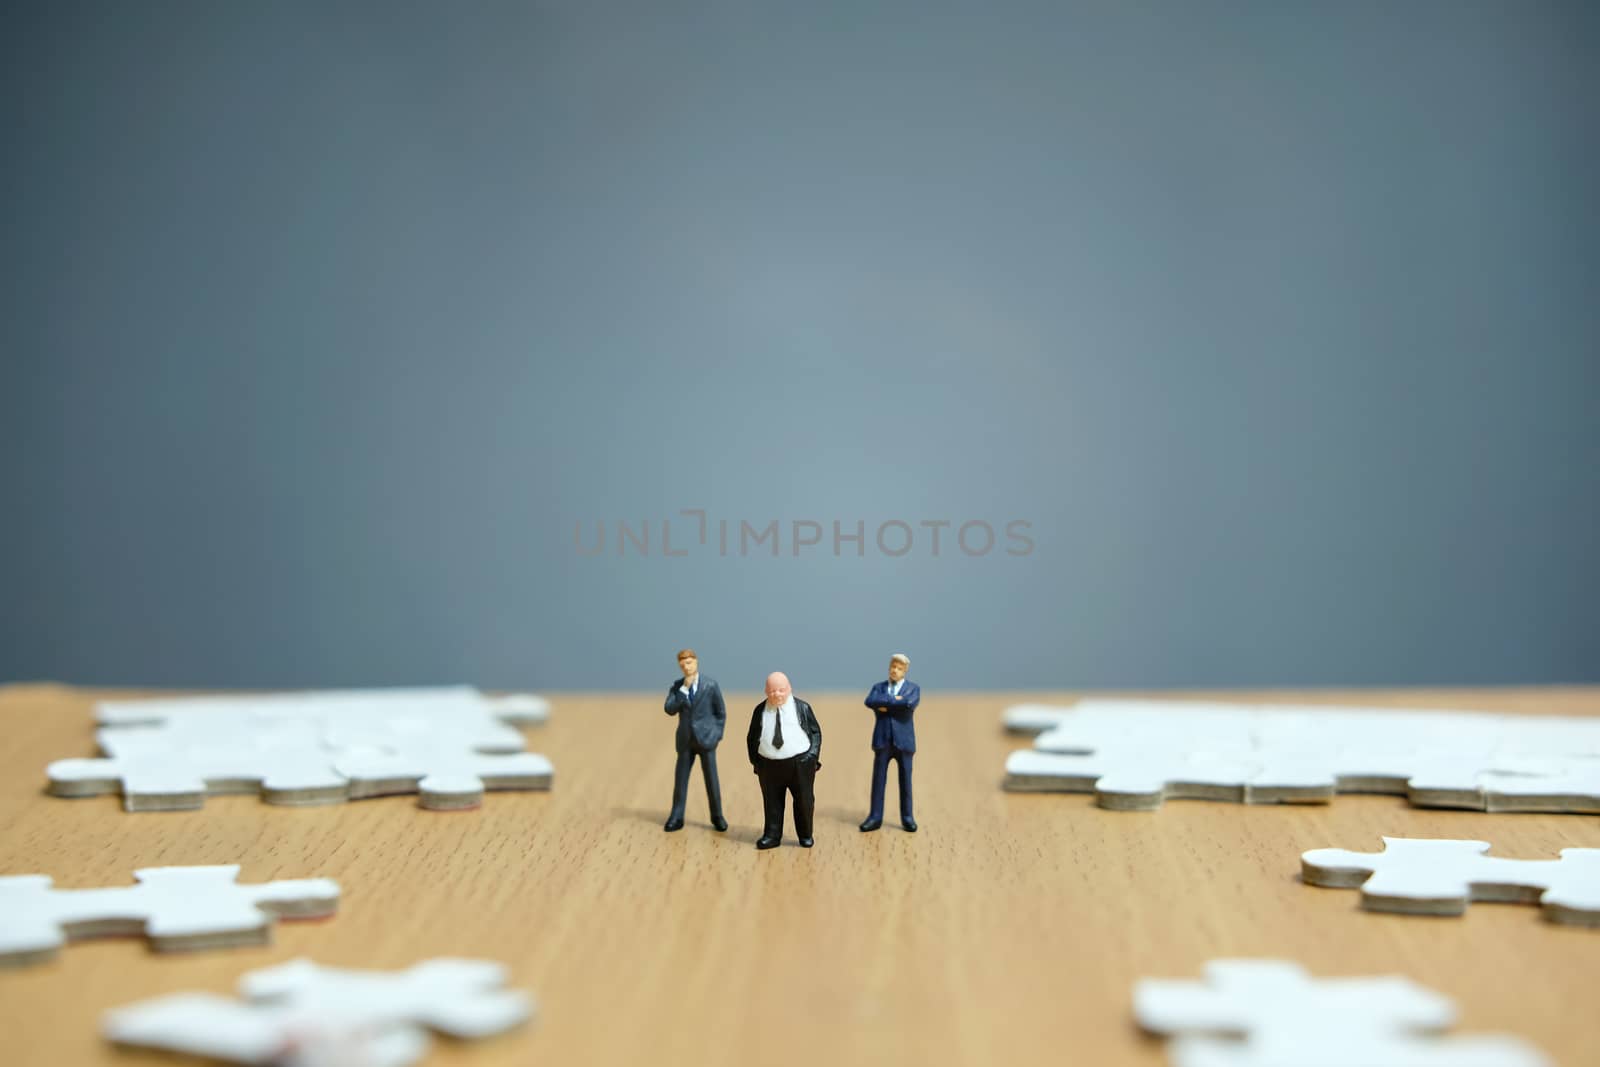 Conceptual photos of business strategies - miniature people businessmen standing in front of uncomplete jigsaw puzzles